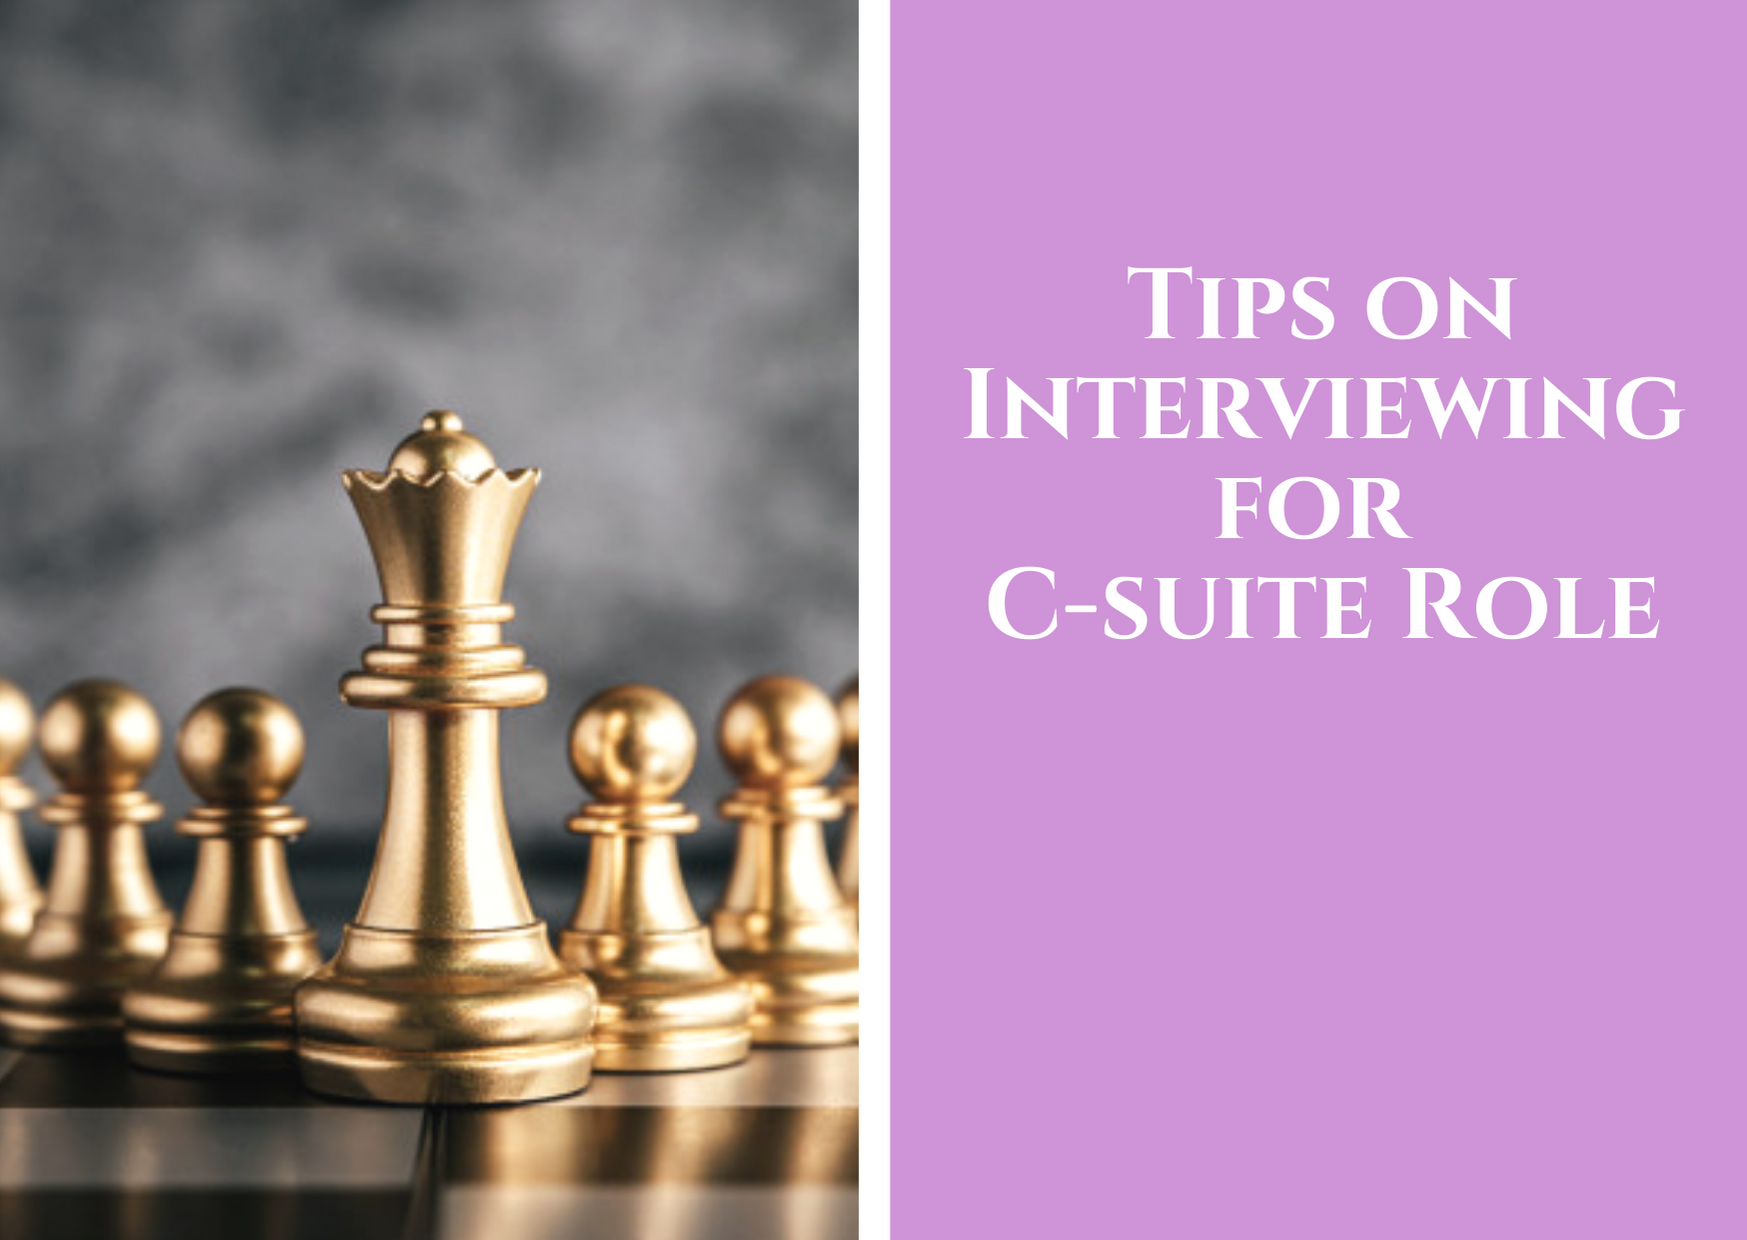 Tips on Interviewing for C-suite Role